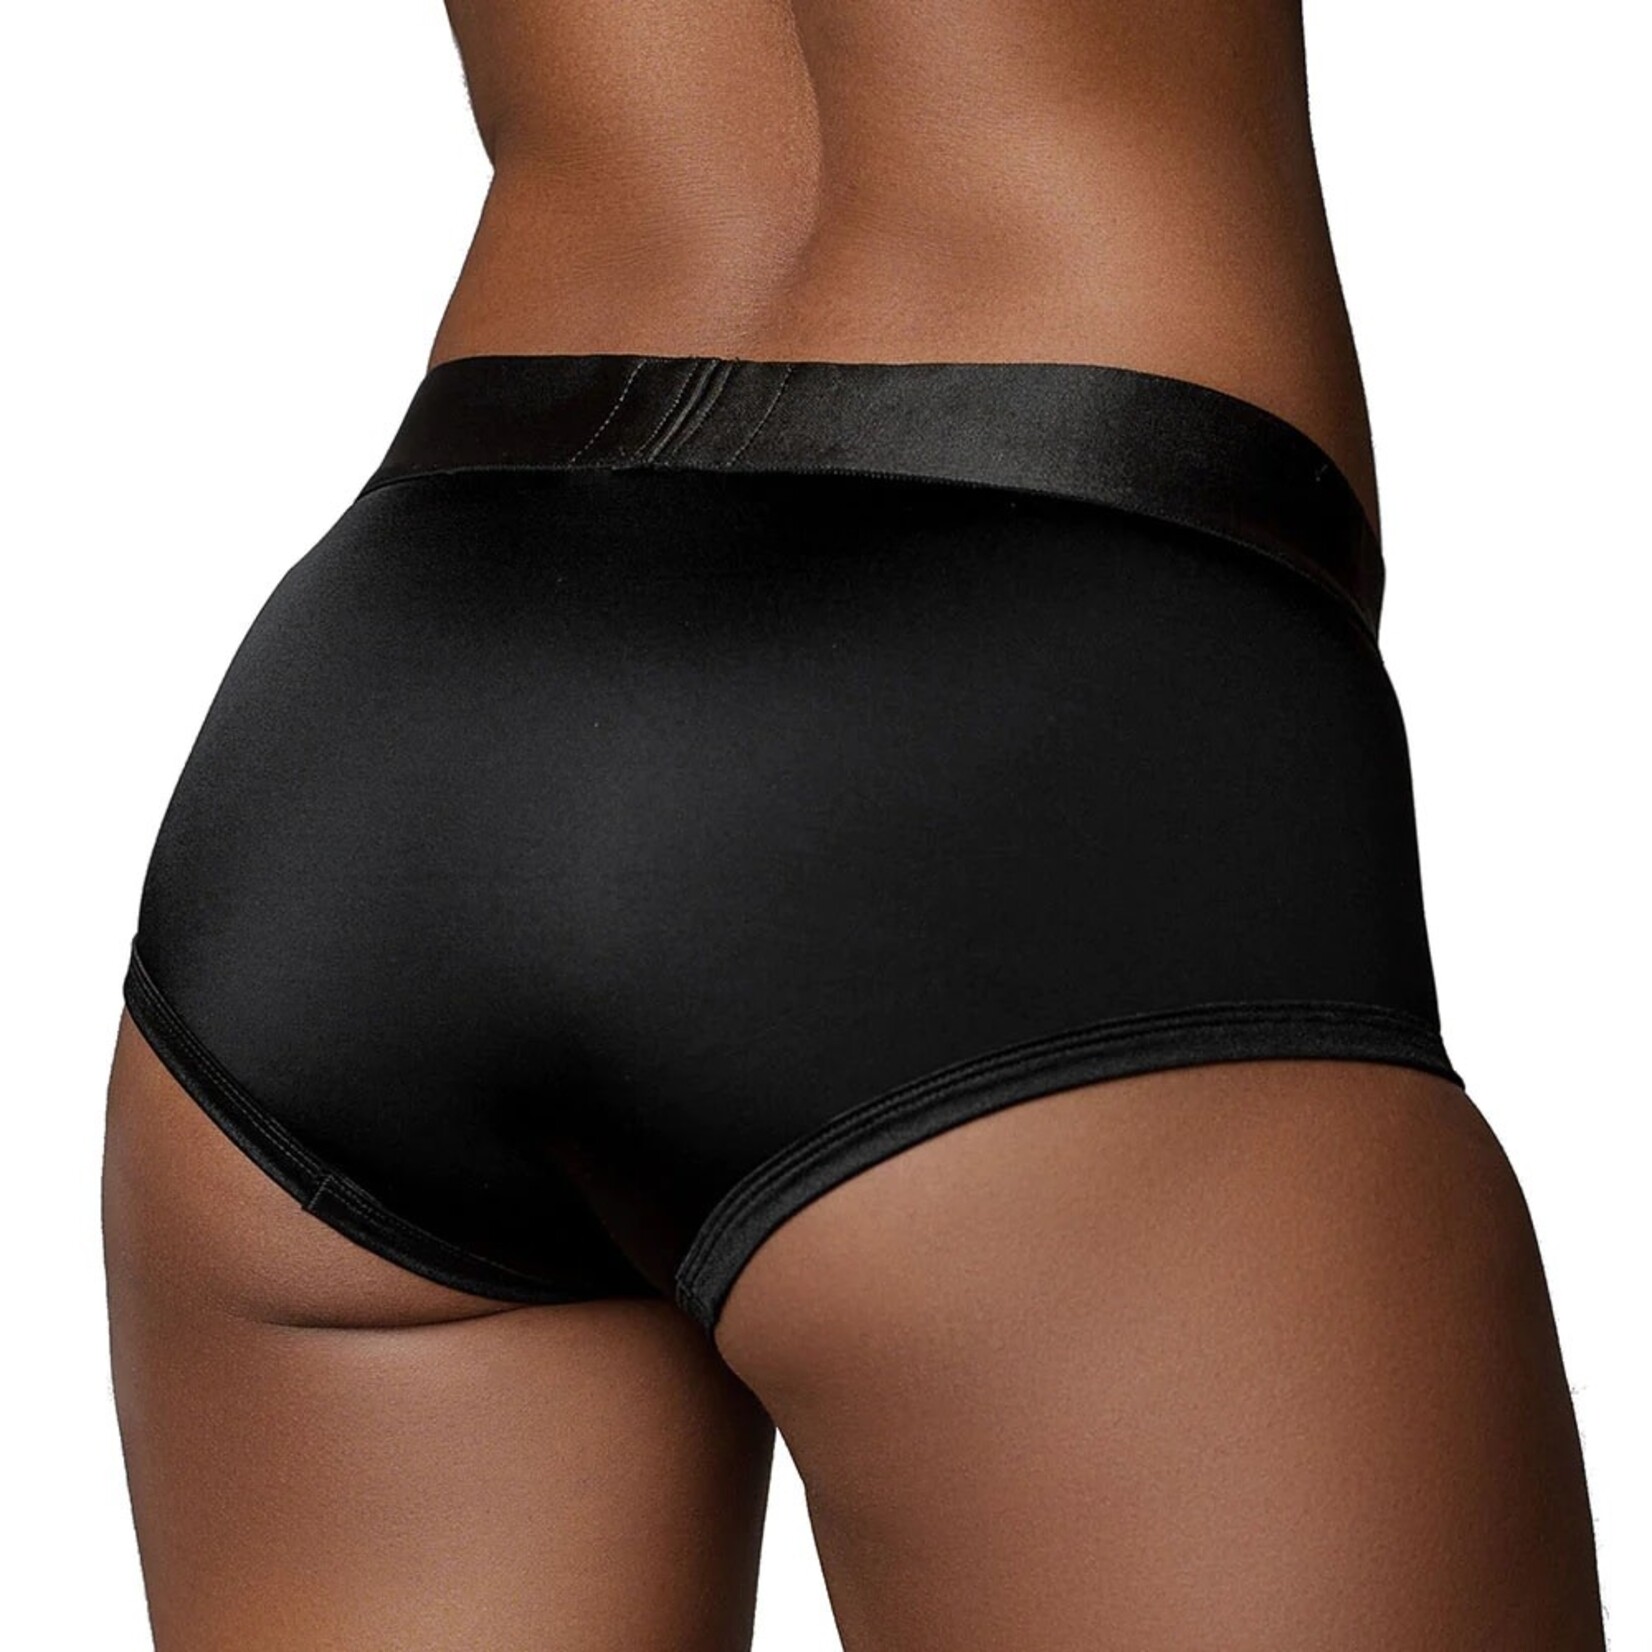 OUCH OUCH! BLACK VIBRATING STRAP-ON BRIEF M/L